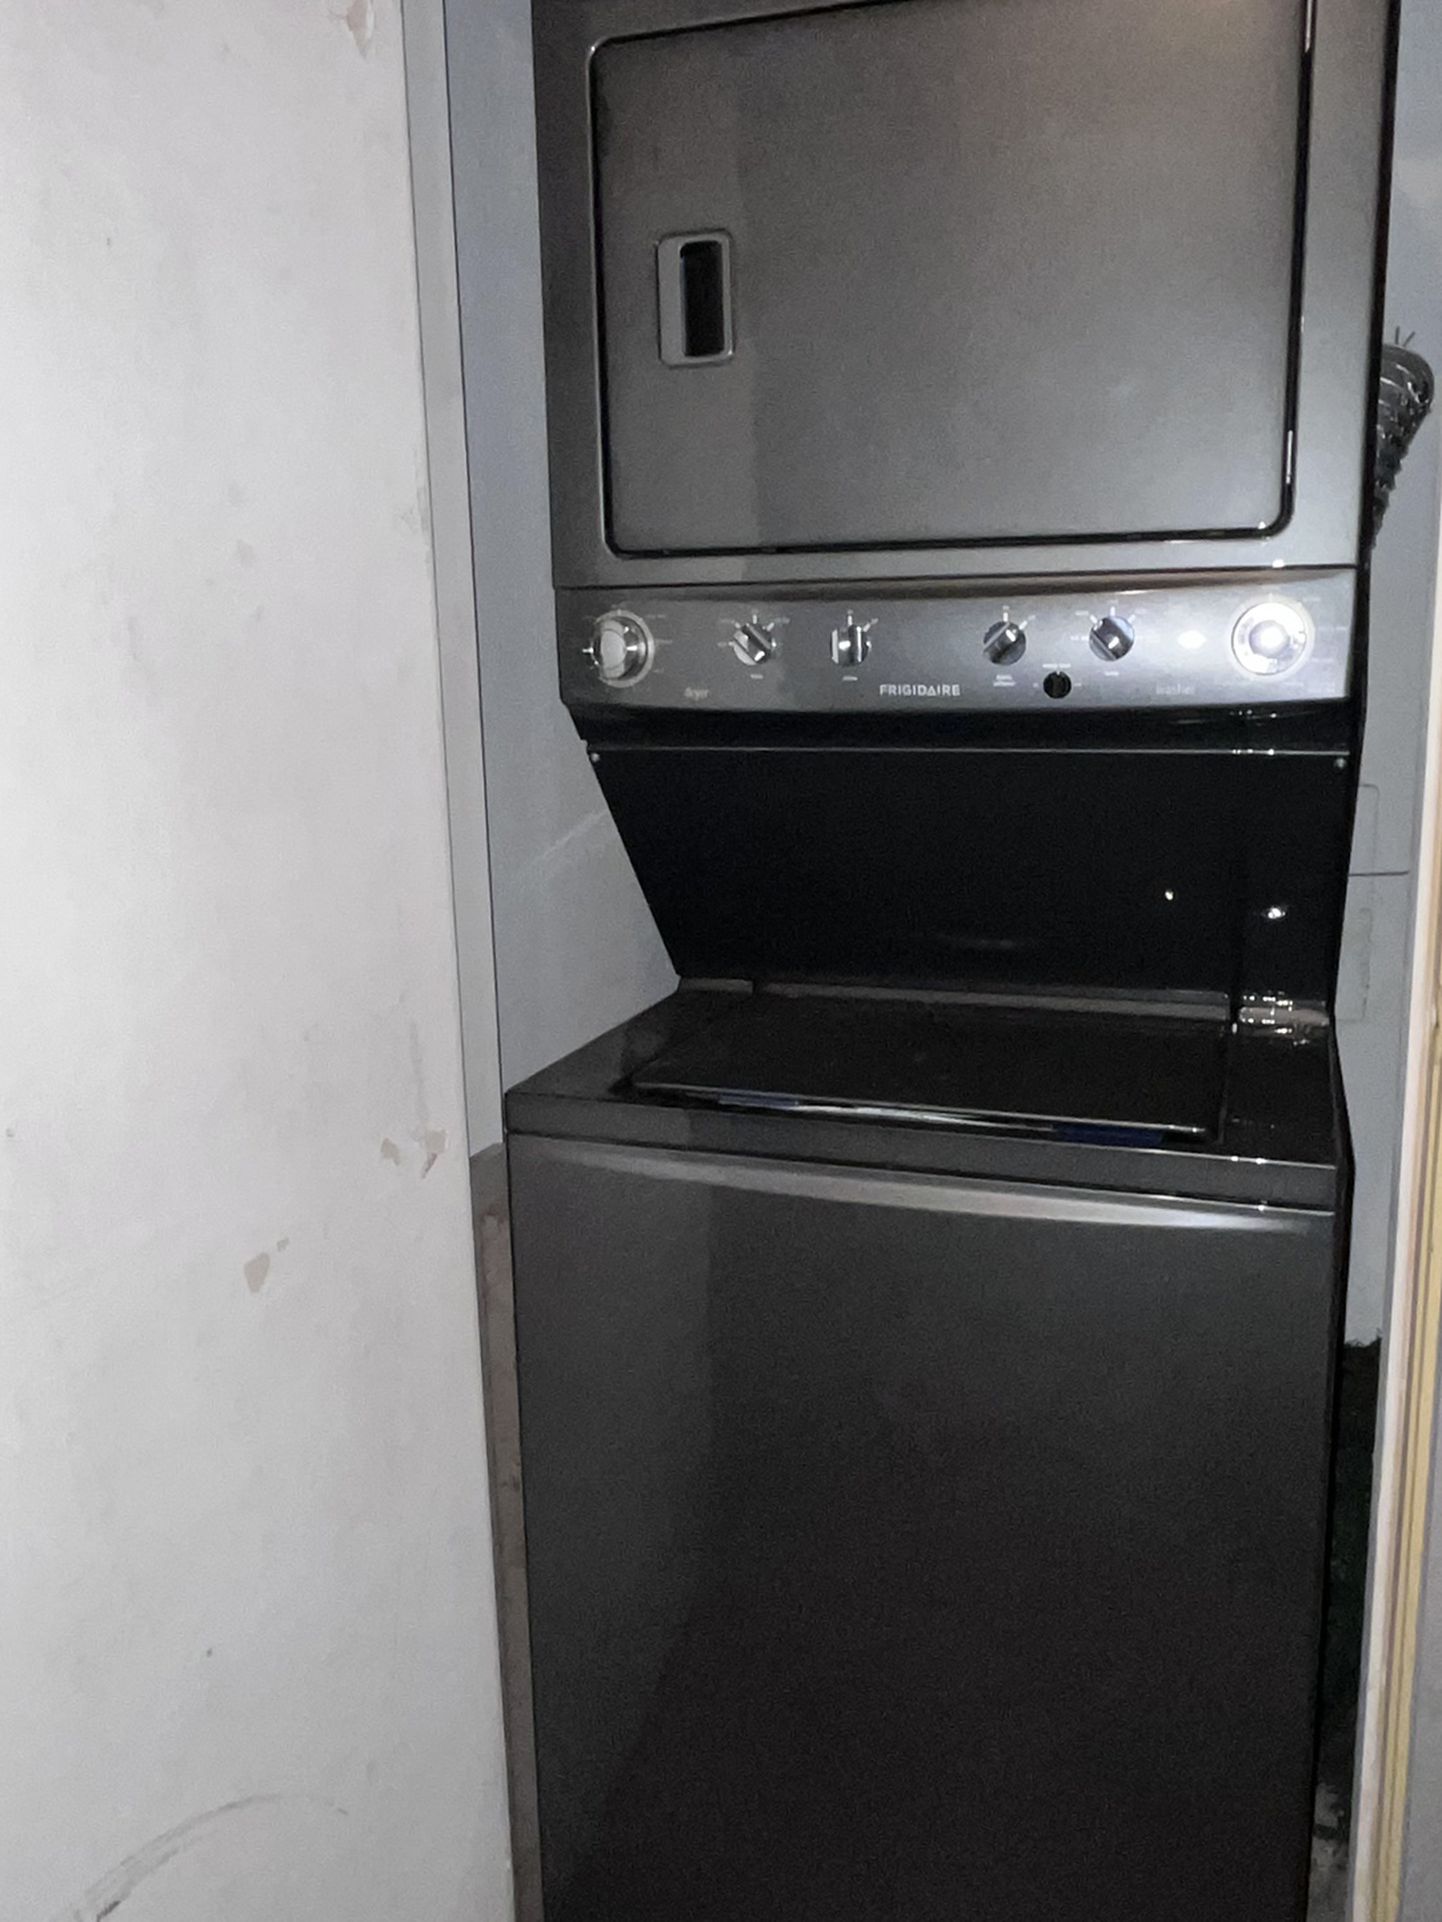 Frigidaire washer and dryer 